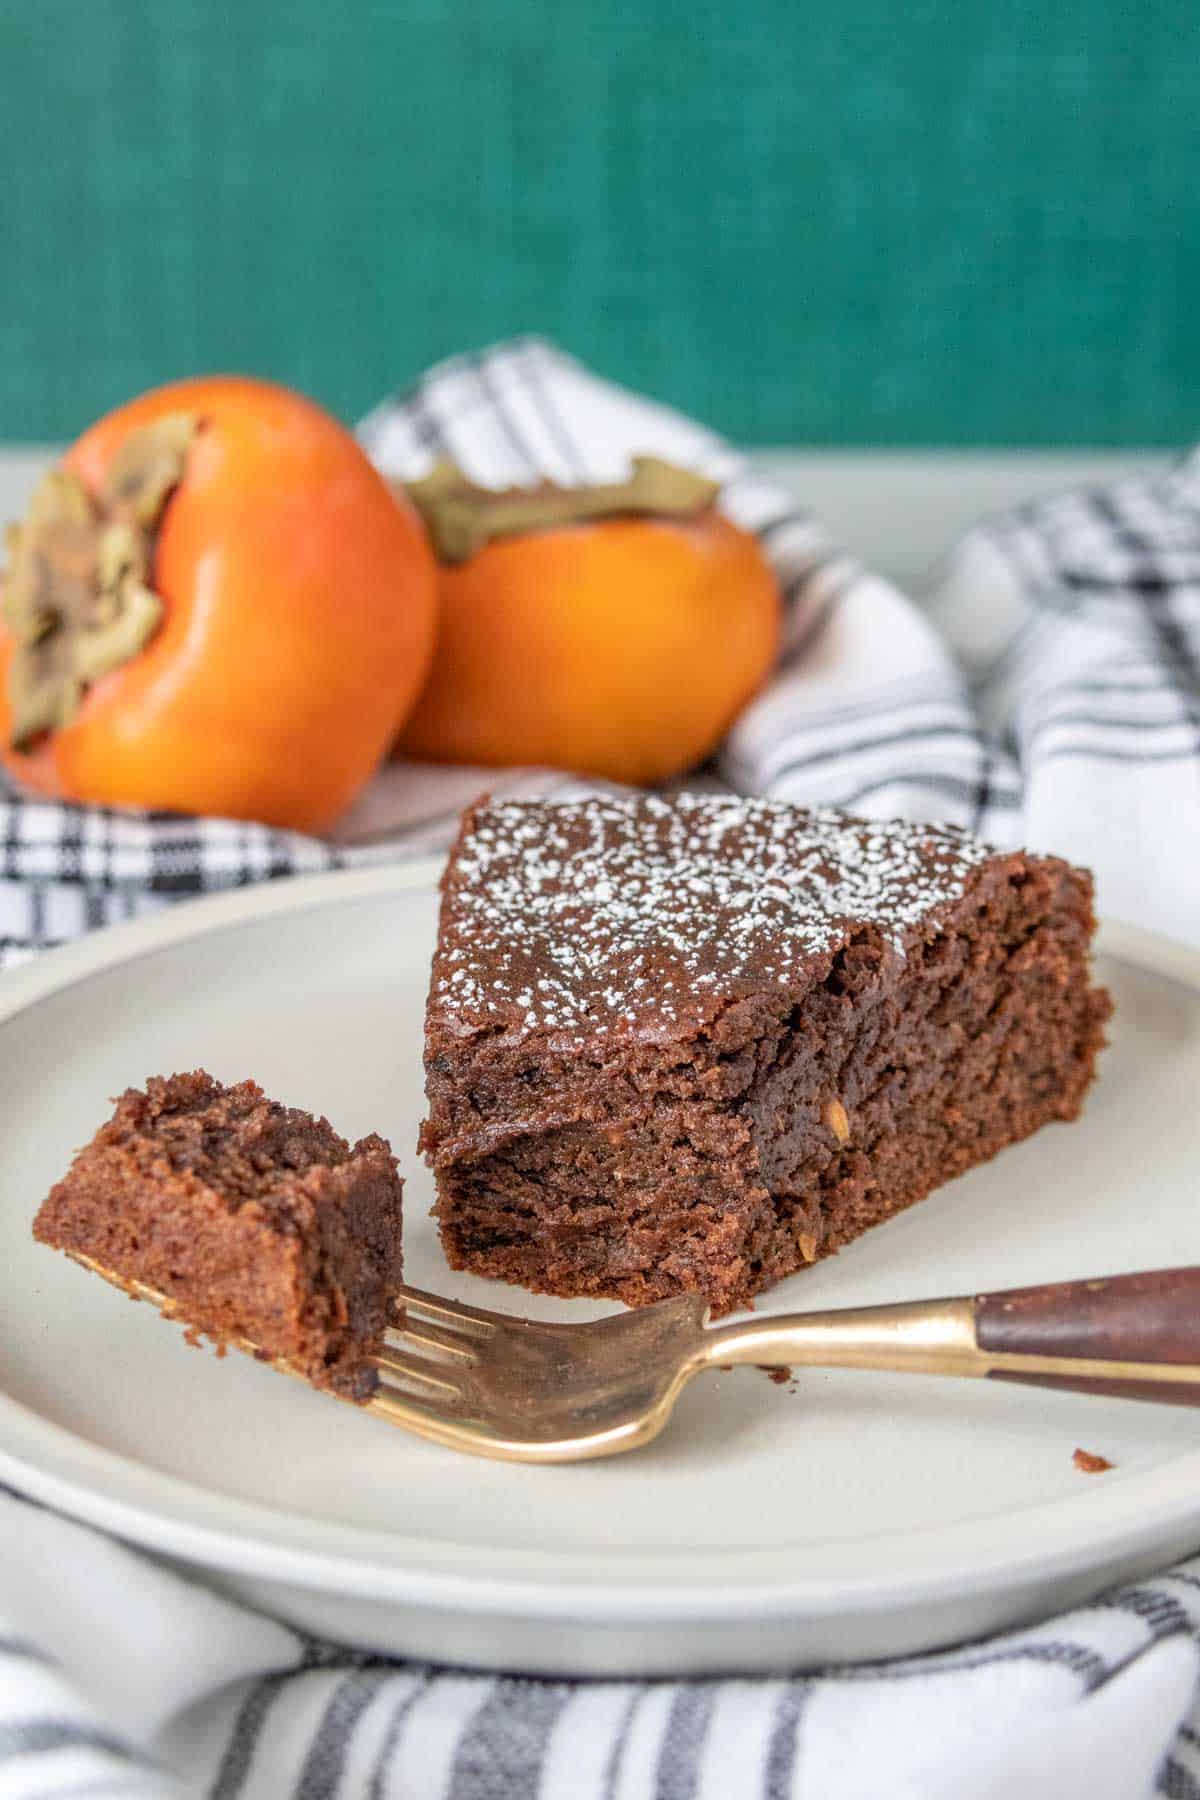 Slice of chocolate persimmon cake with bites taken and a piece on a fork.